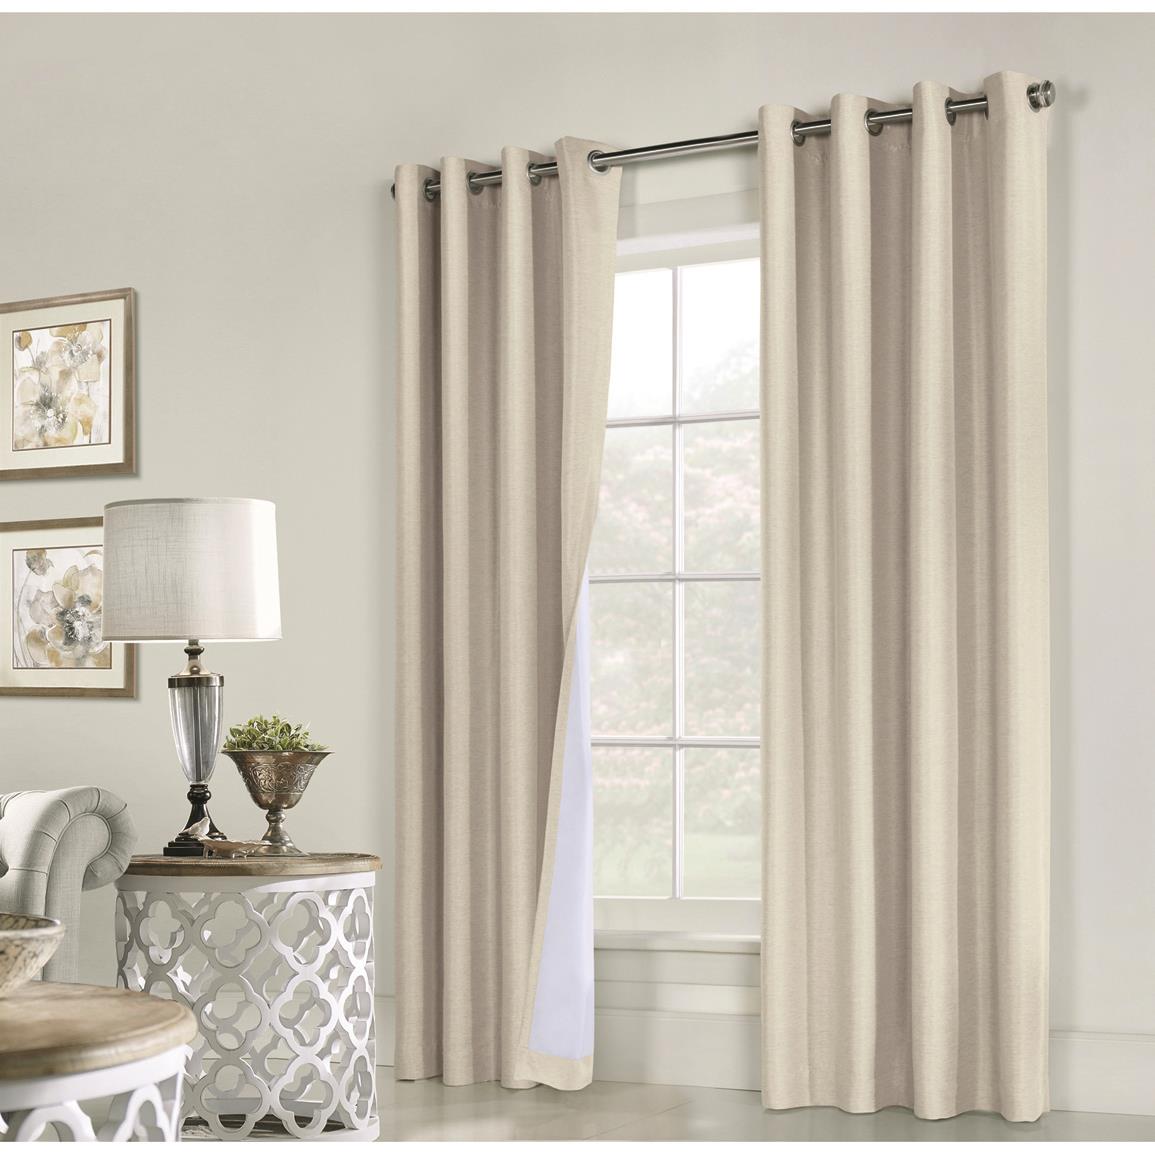 Commonwealth Home Fashions Thermaplus Ventura Blackout Curtain Panel Set, Natural